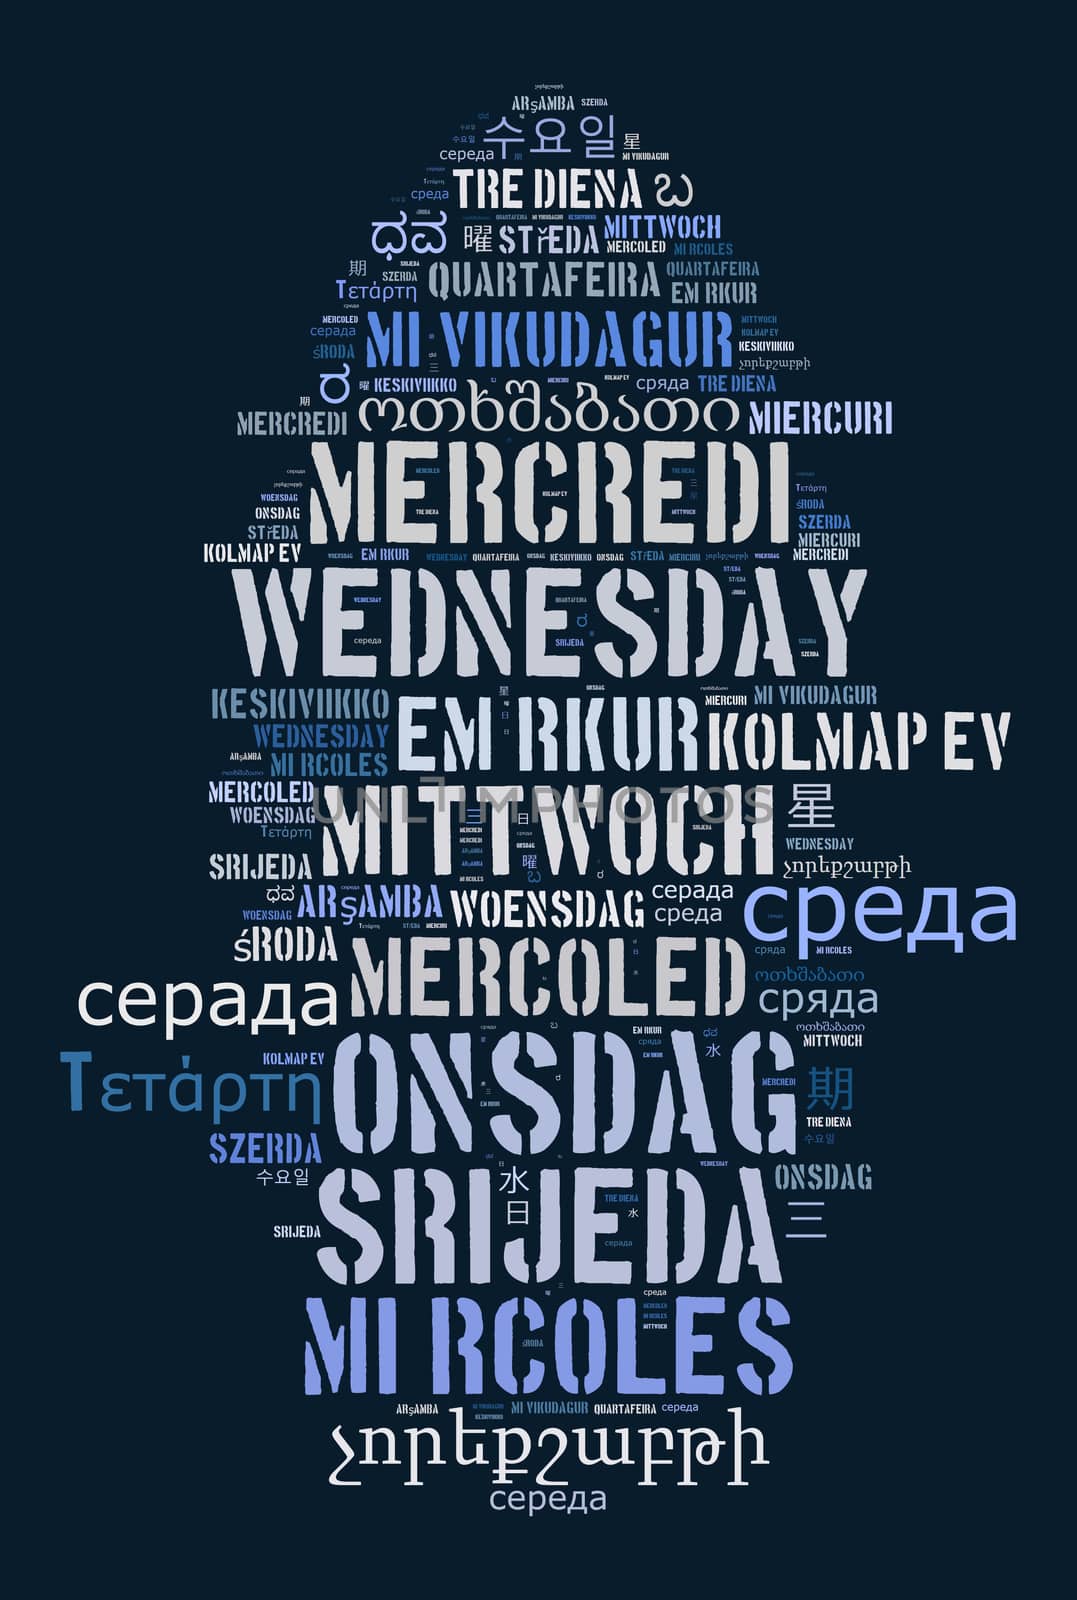 Word Wednesday in different languages by eenevski